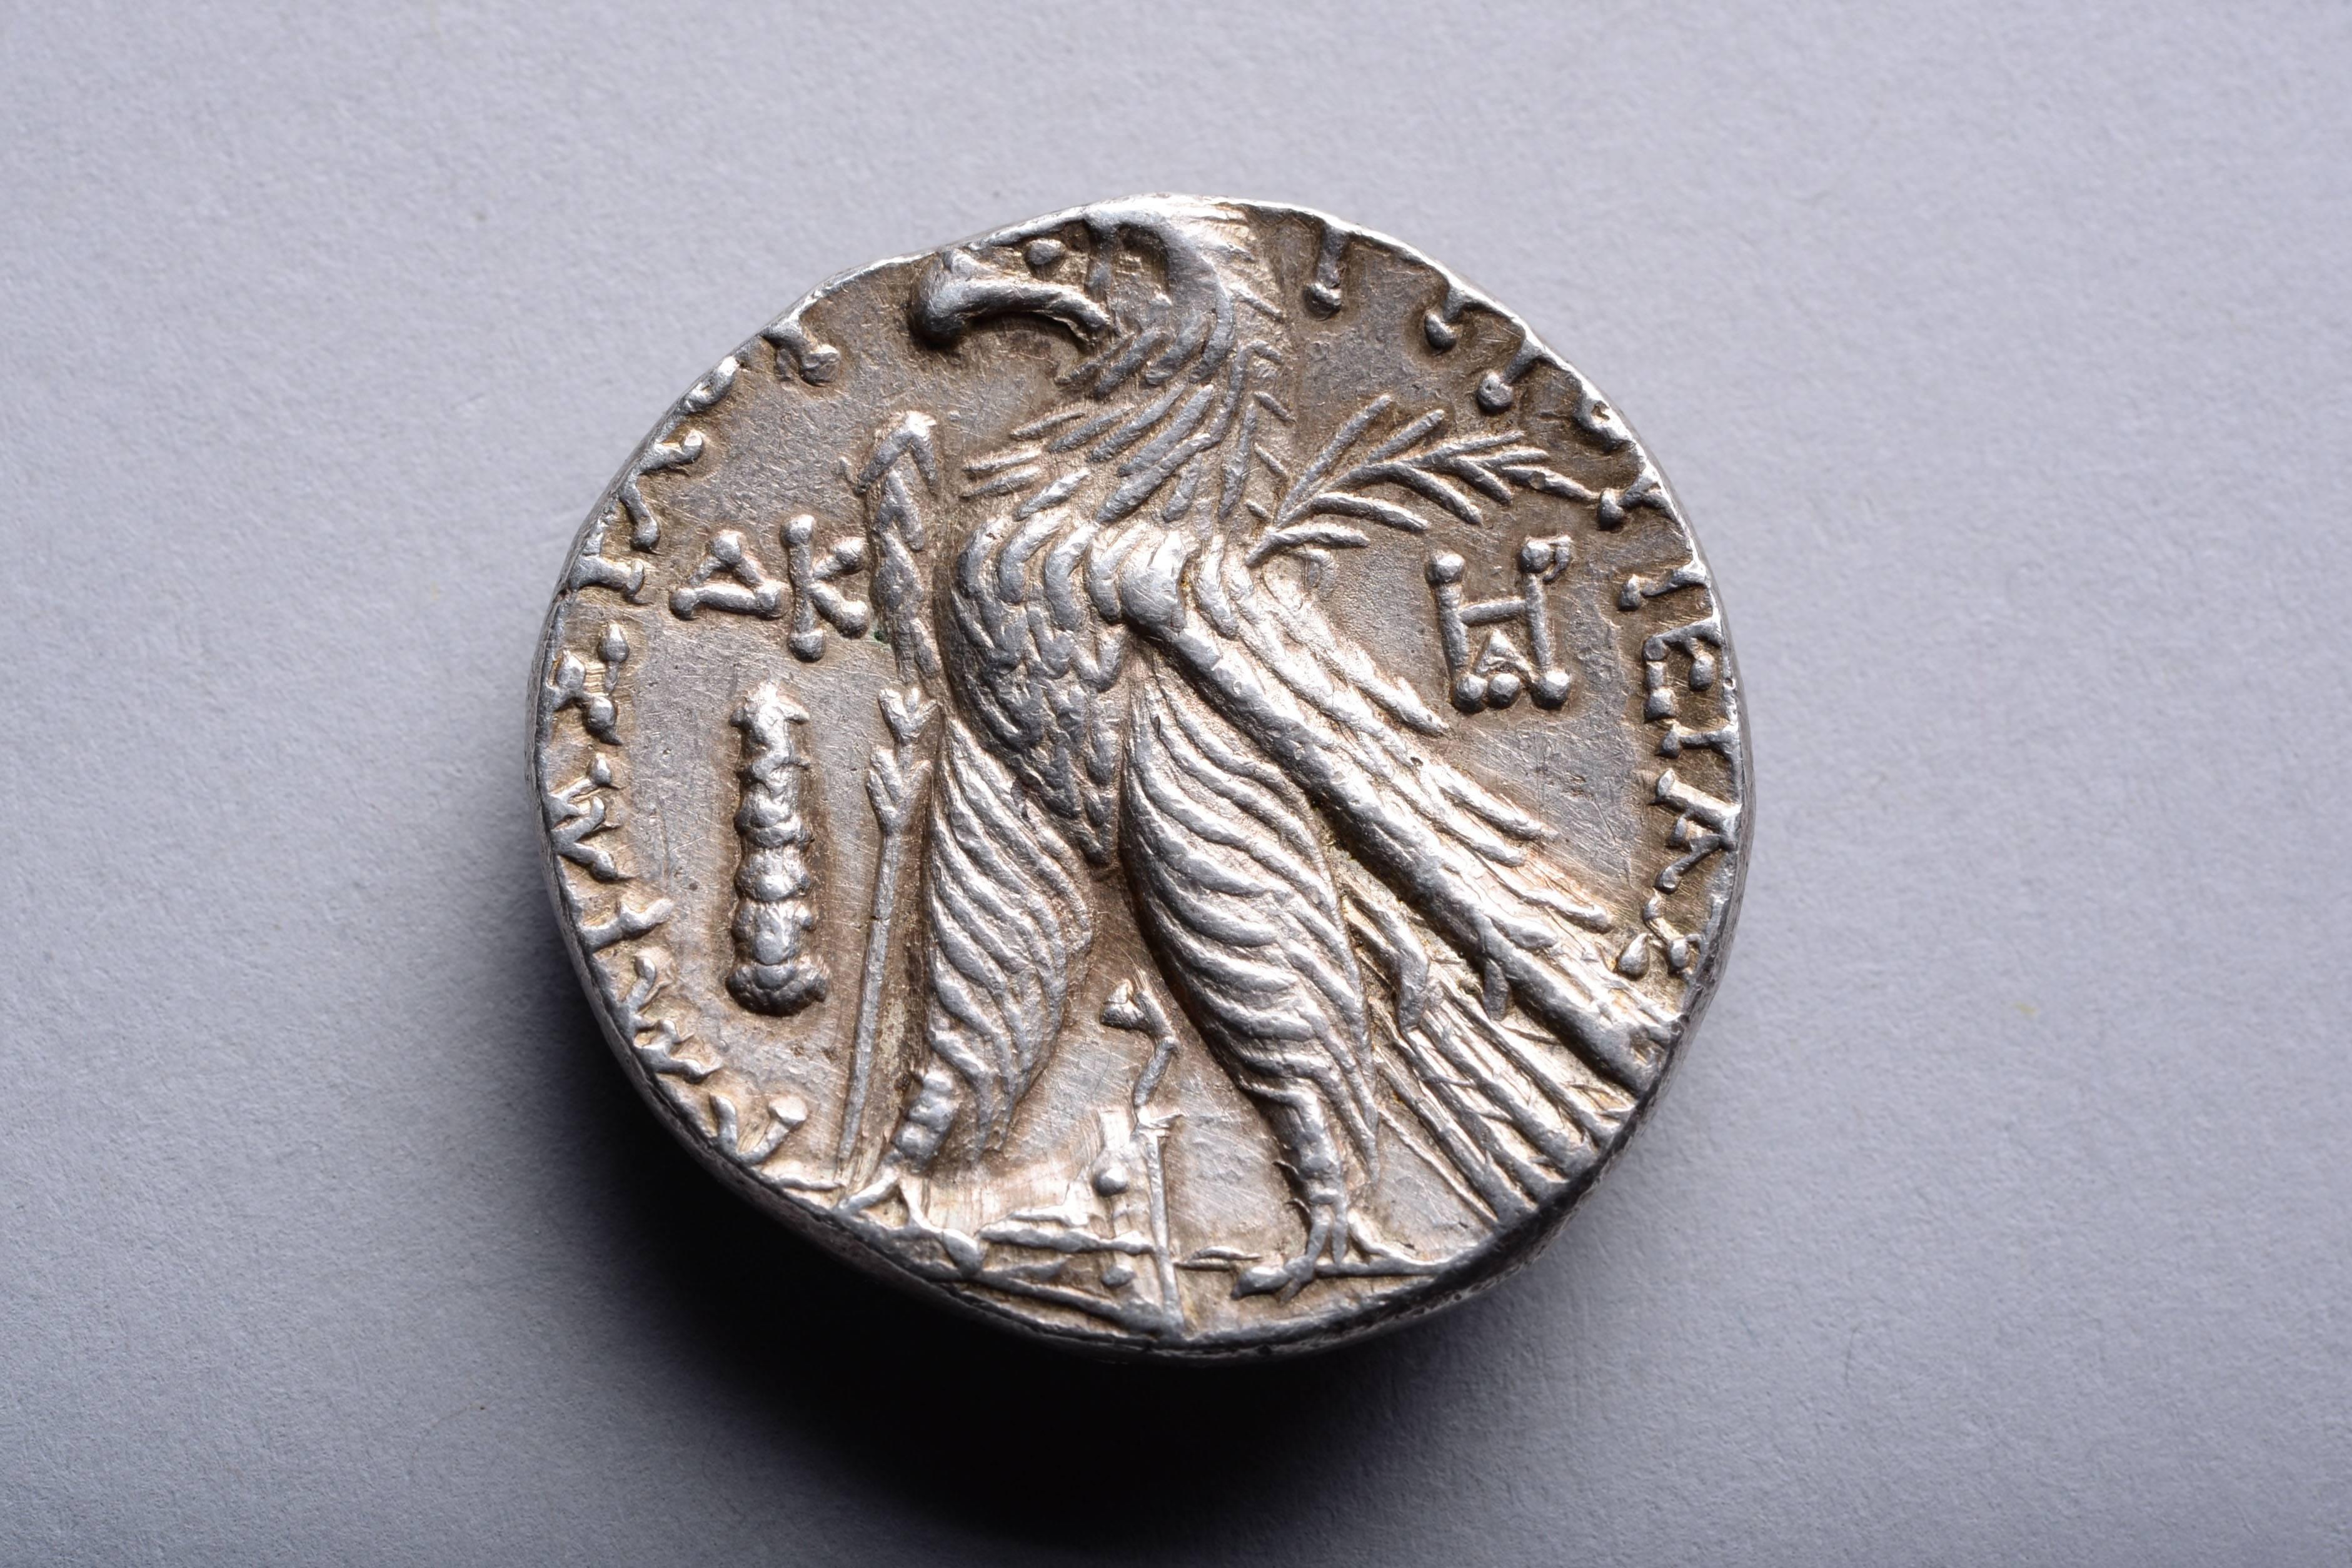 A silver shekel from the city of Tyre, minted in year 24 of the Tyrian calendar, 103 / 102 BC.

The obverse with the portrait of the god Melqart (chief deity of Tyre), wearing laurel wreath.

The reverse with eagle, standing on ship's prow, palm